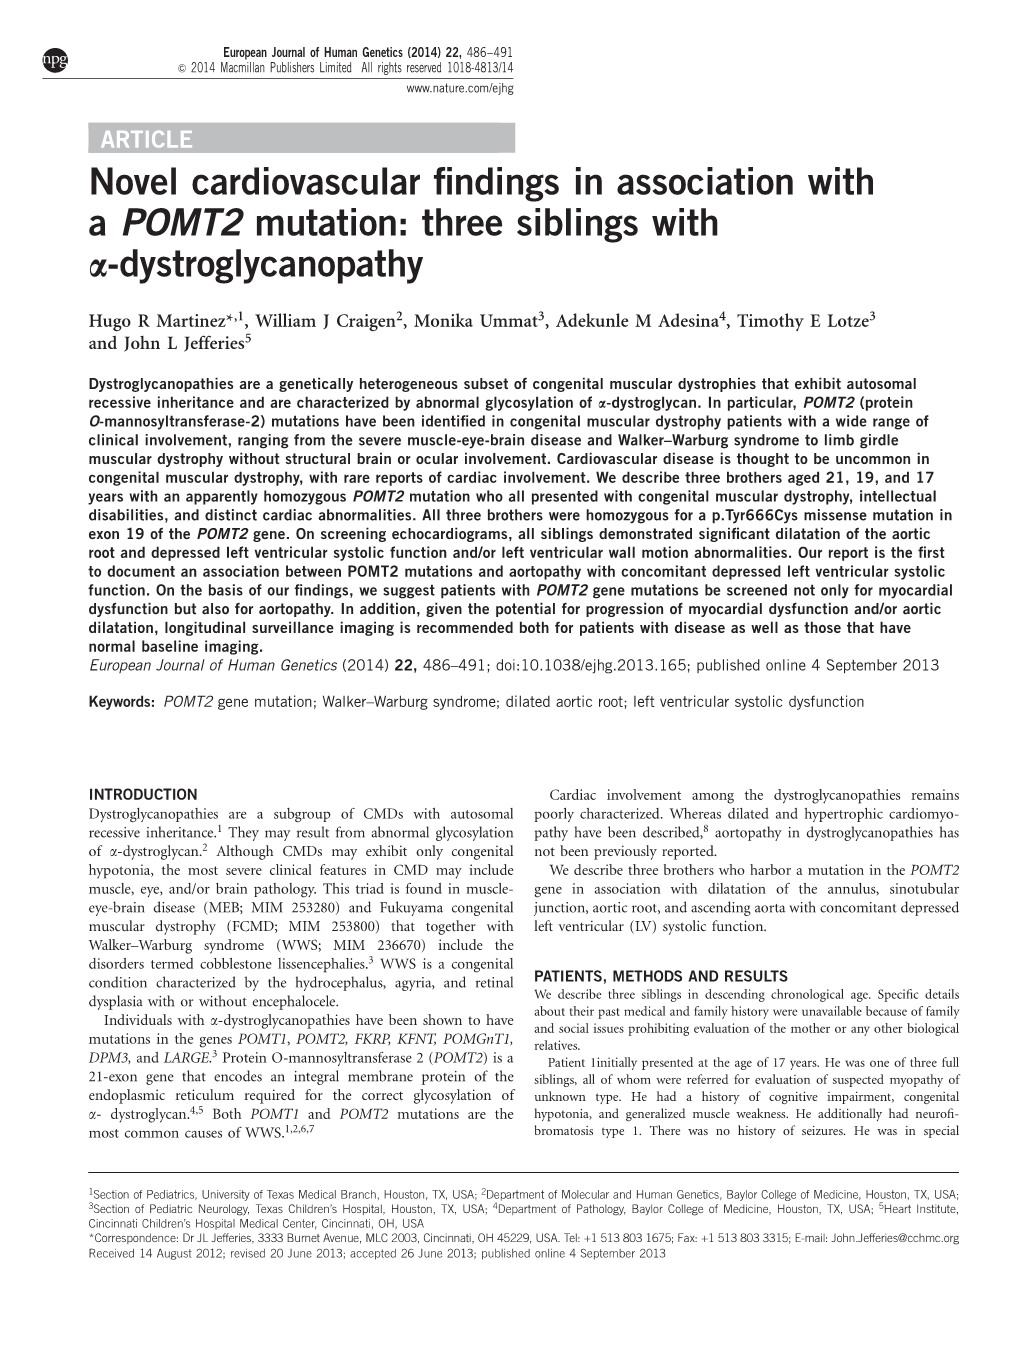 Novel Cardiovascular Findings in Association with a POMT2